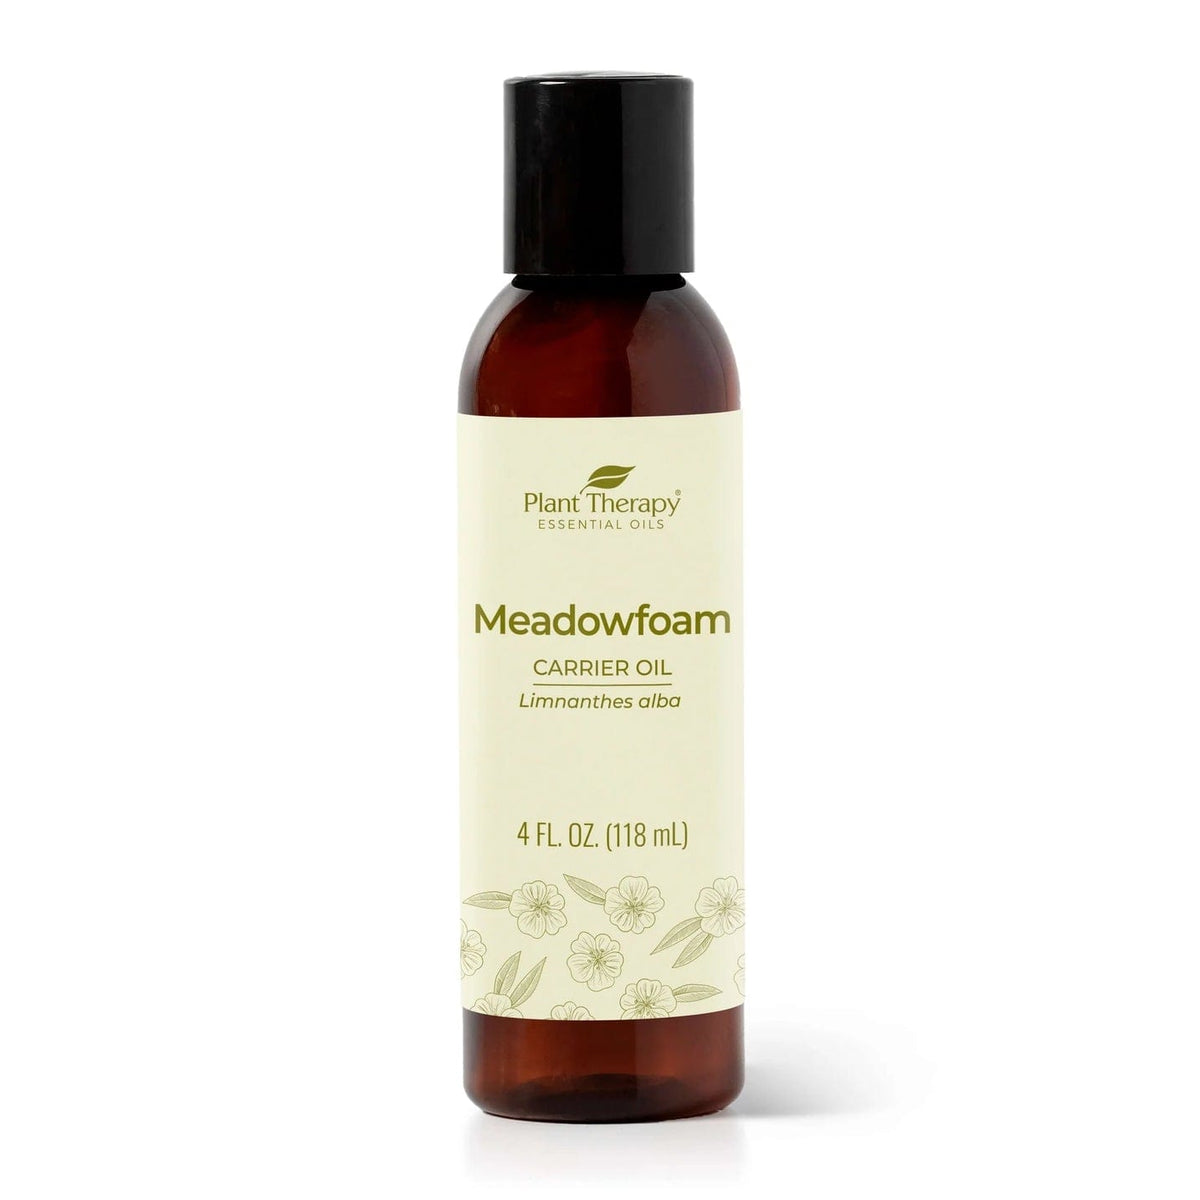 Plant Therapy Meadowfoam Carrier Oil